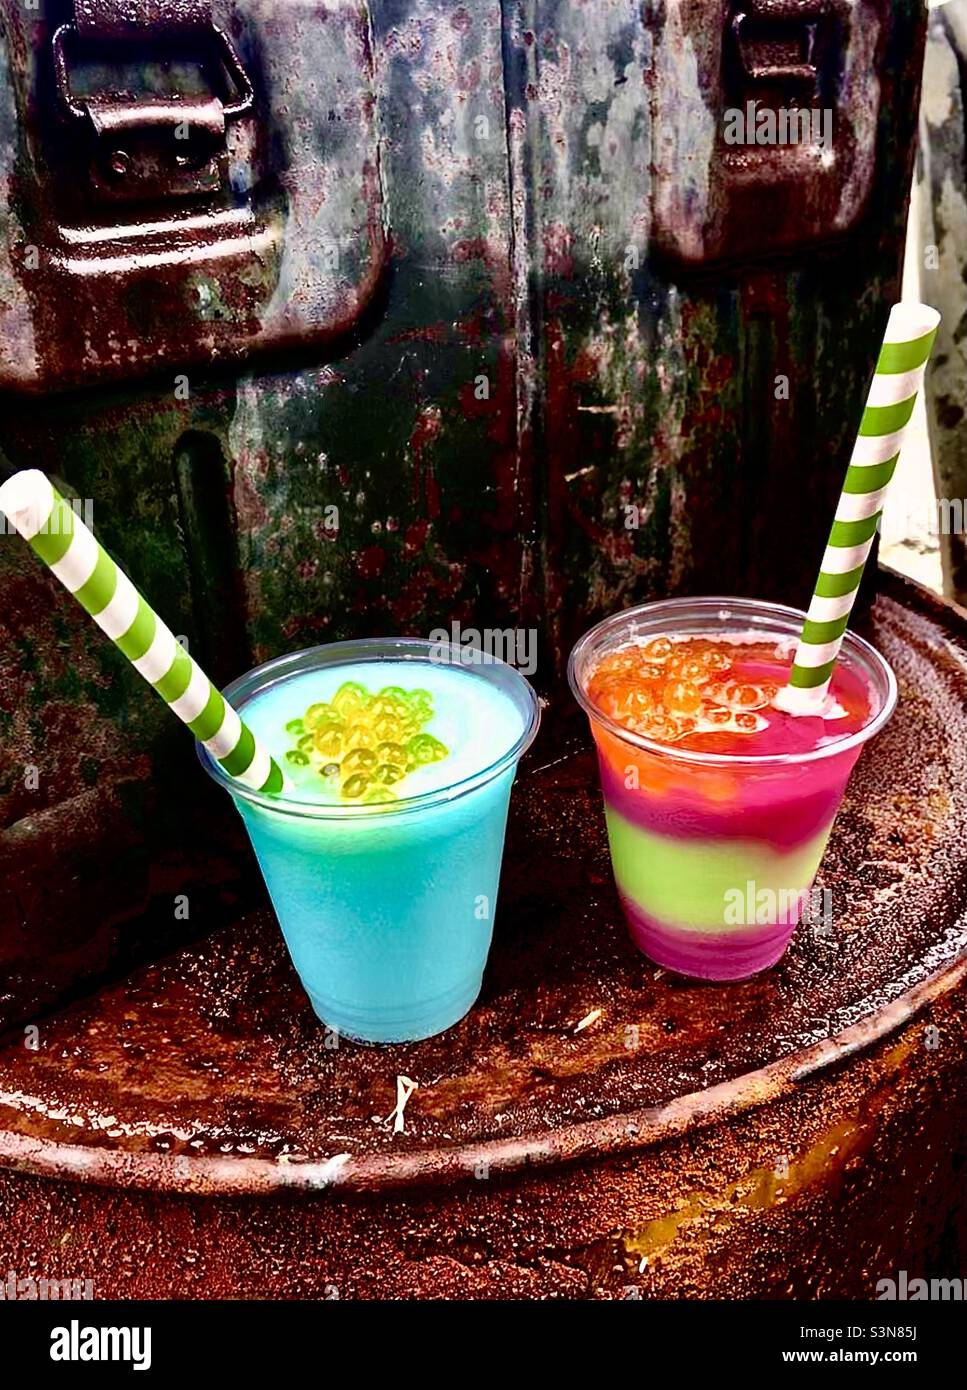 Pretty, colorful frozen adult beverages at Disney’s Animal Kingdom, Pandora / Avatar / Na’vi / flight of passage section, eco friendly paper straws Stock Photo